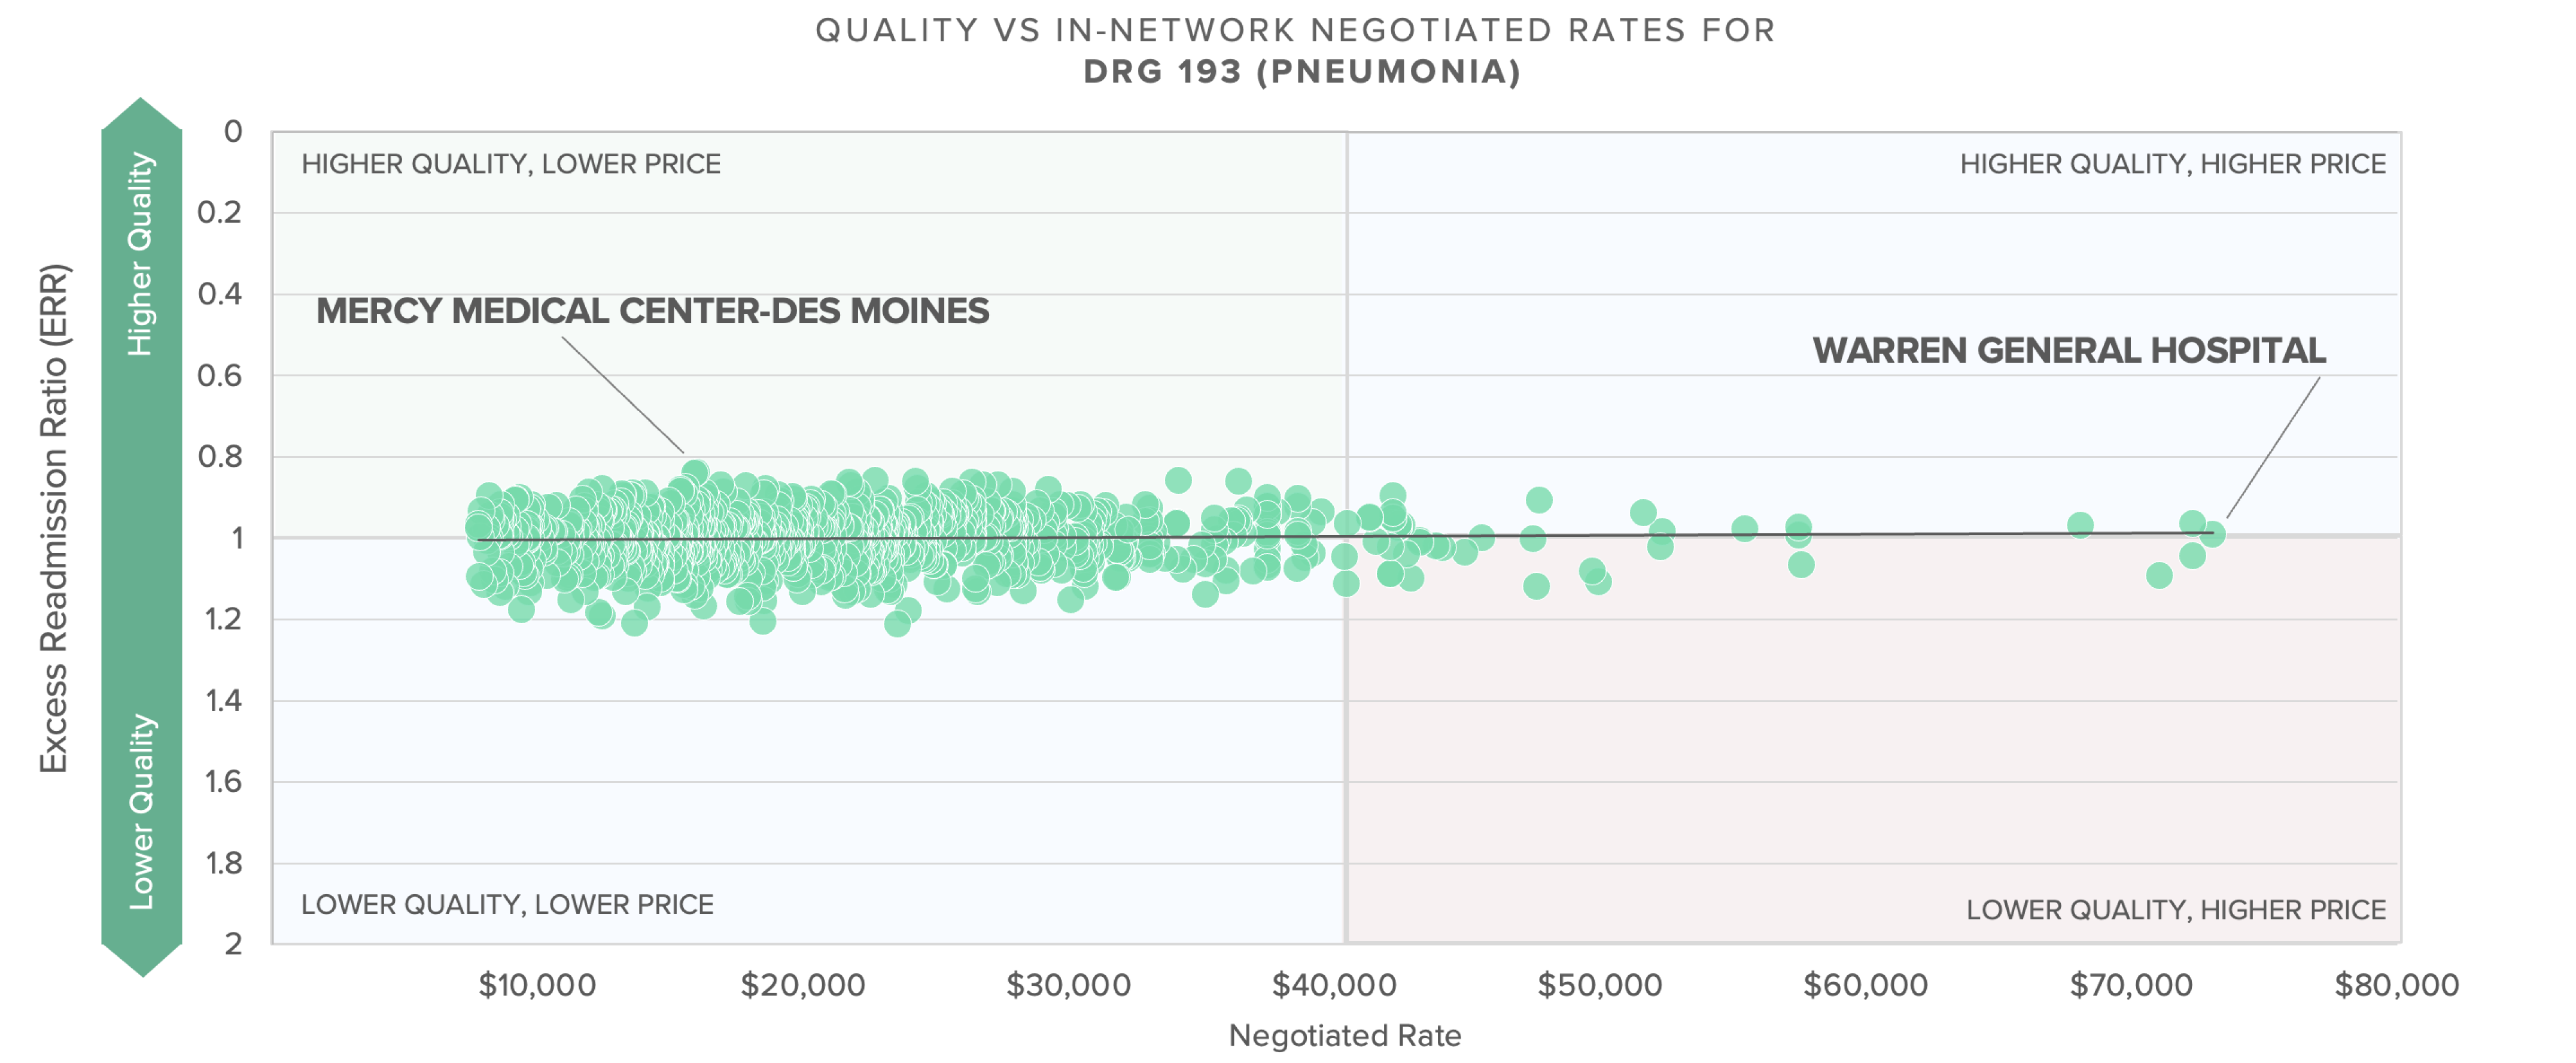 QUALITY VS IN-NETWORK NEGOTIATED RATES FOR  DRG 193 (PNEUMONIA)